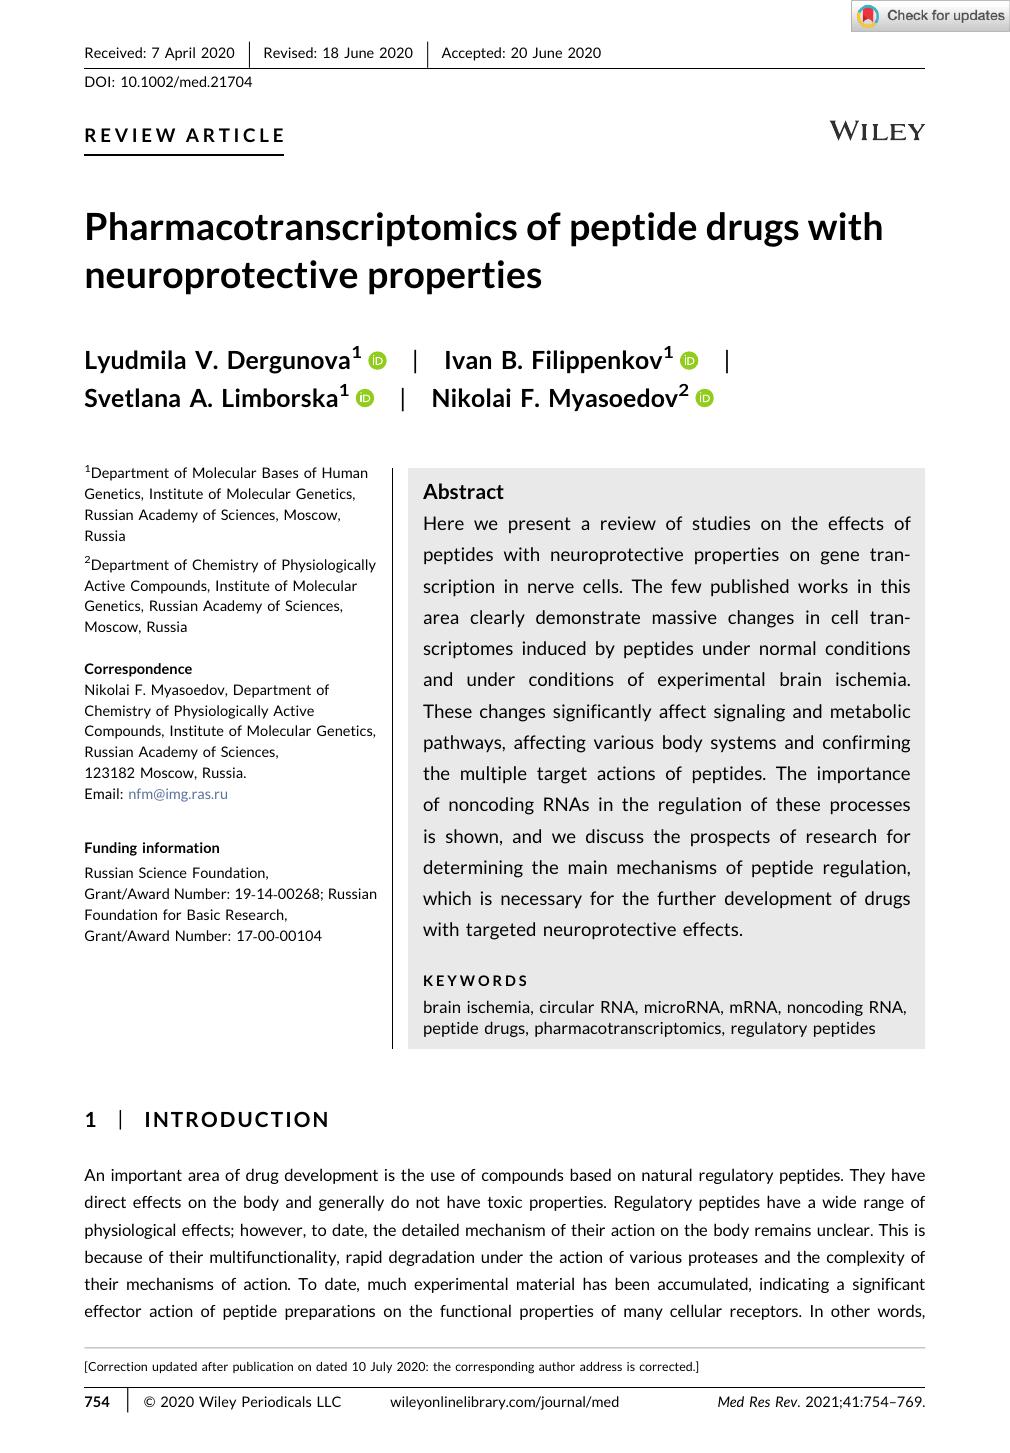 Pharmacotranscriptomics of peptide drugs with neuroprotective properties by Unknown